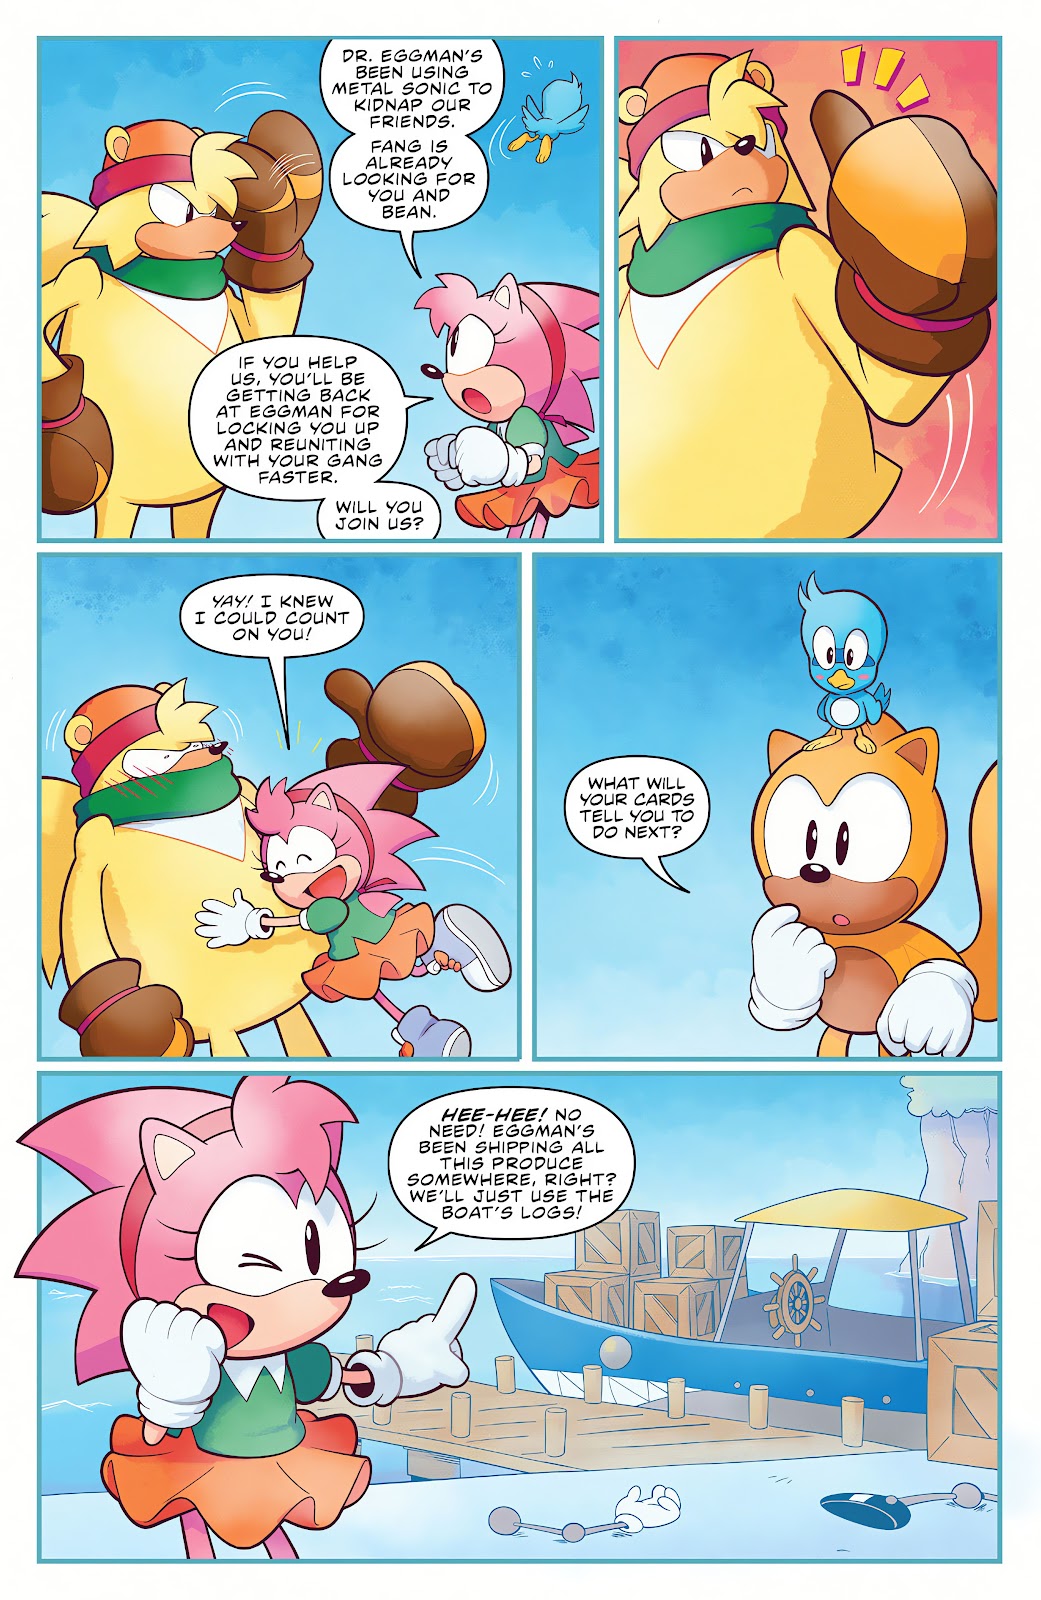 Sonic the Hedgehog: Amy's 30th Anniversary Special #Full - Read Sonic the  Hedgehog: Amy's 30th Anniversary Special Issue #Full Online